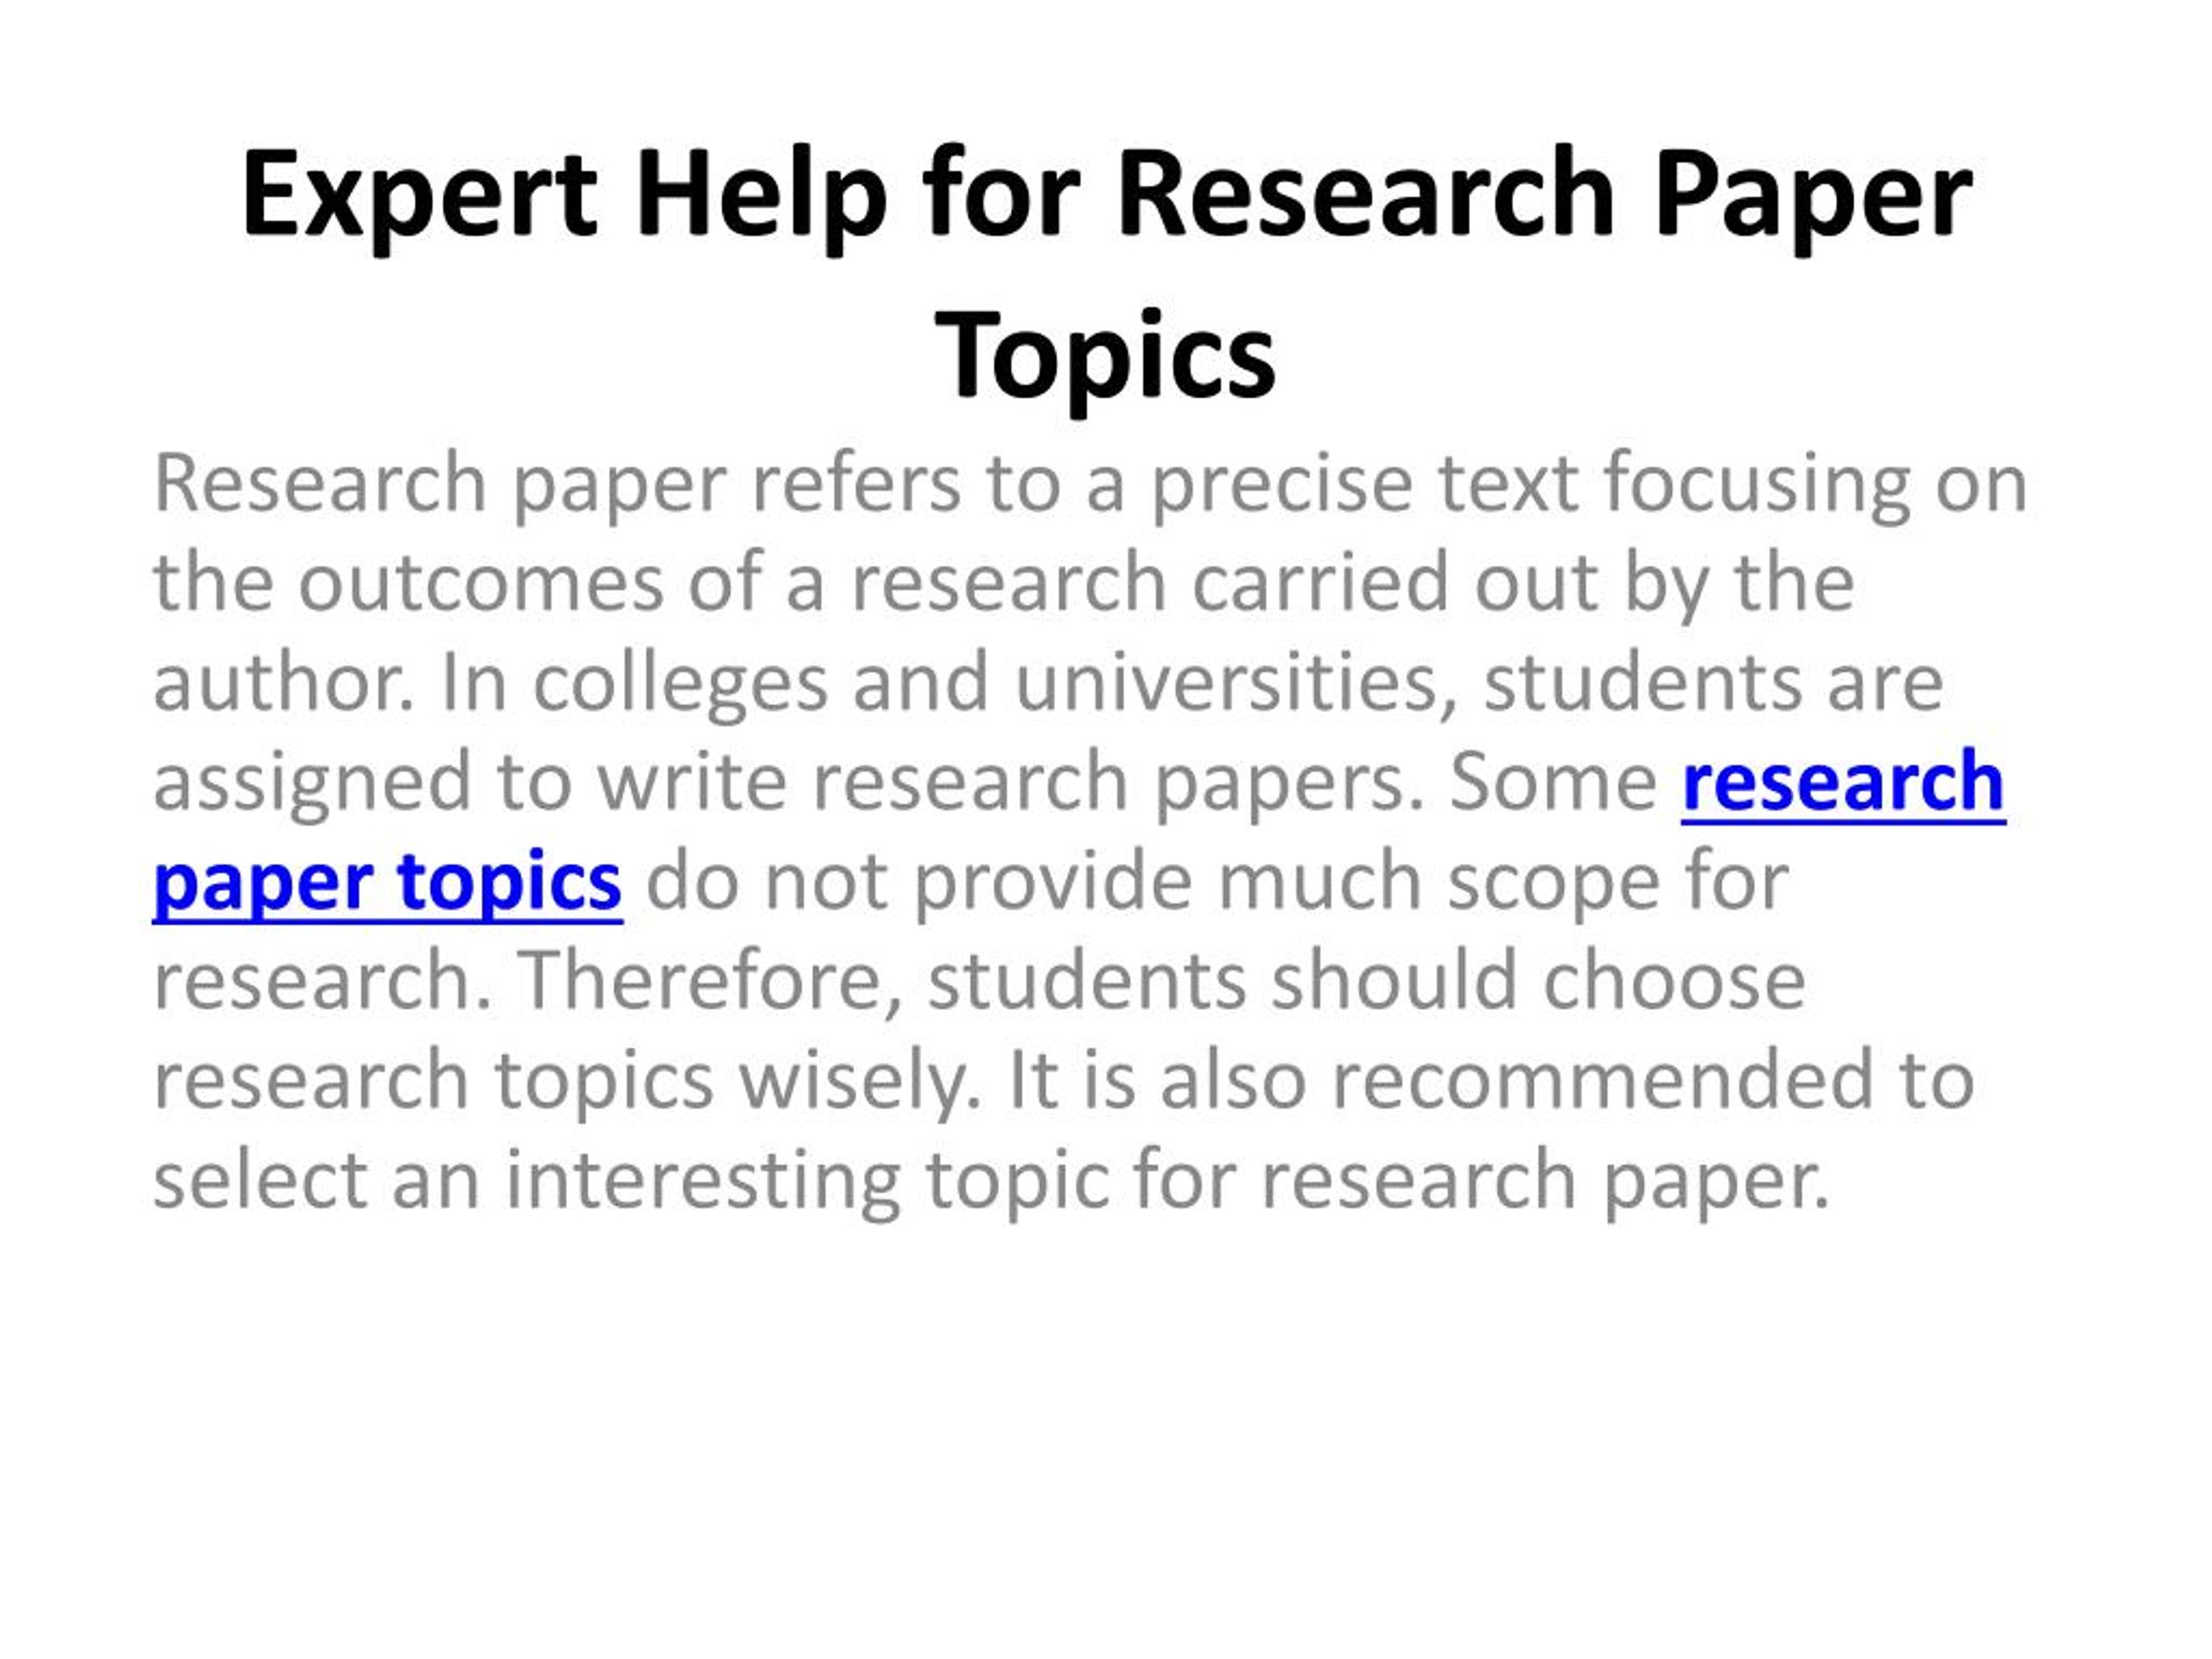 research paper topics ideas for college students